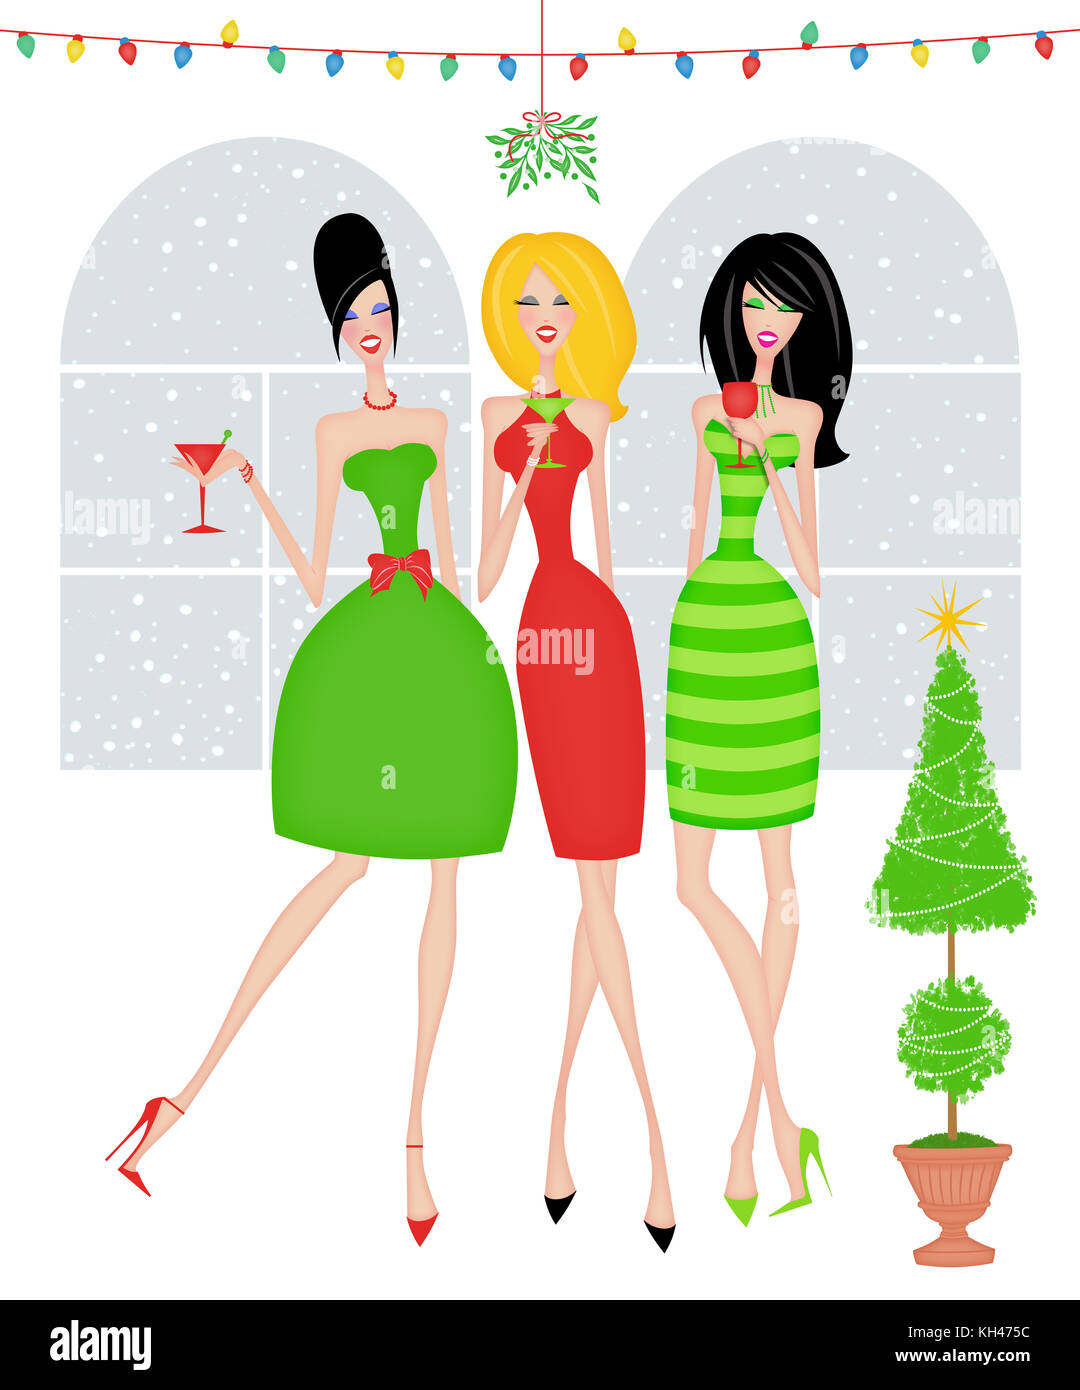 Girlfriends at a Christmas party under the mistletoe Stock Photo